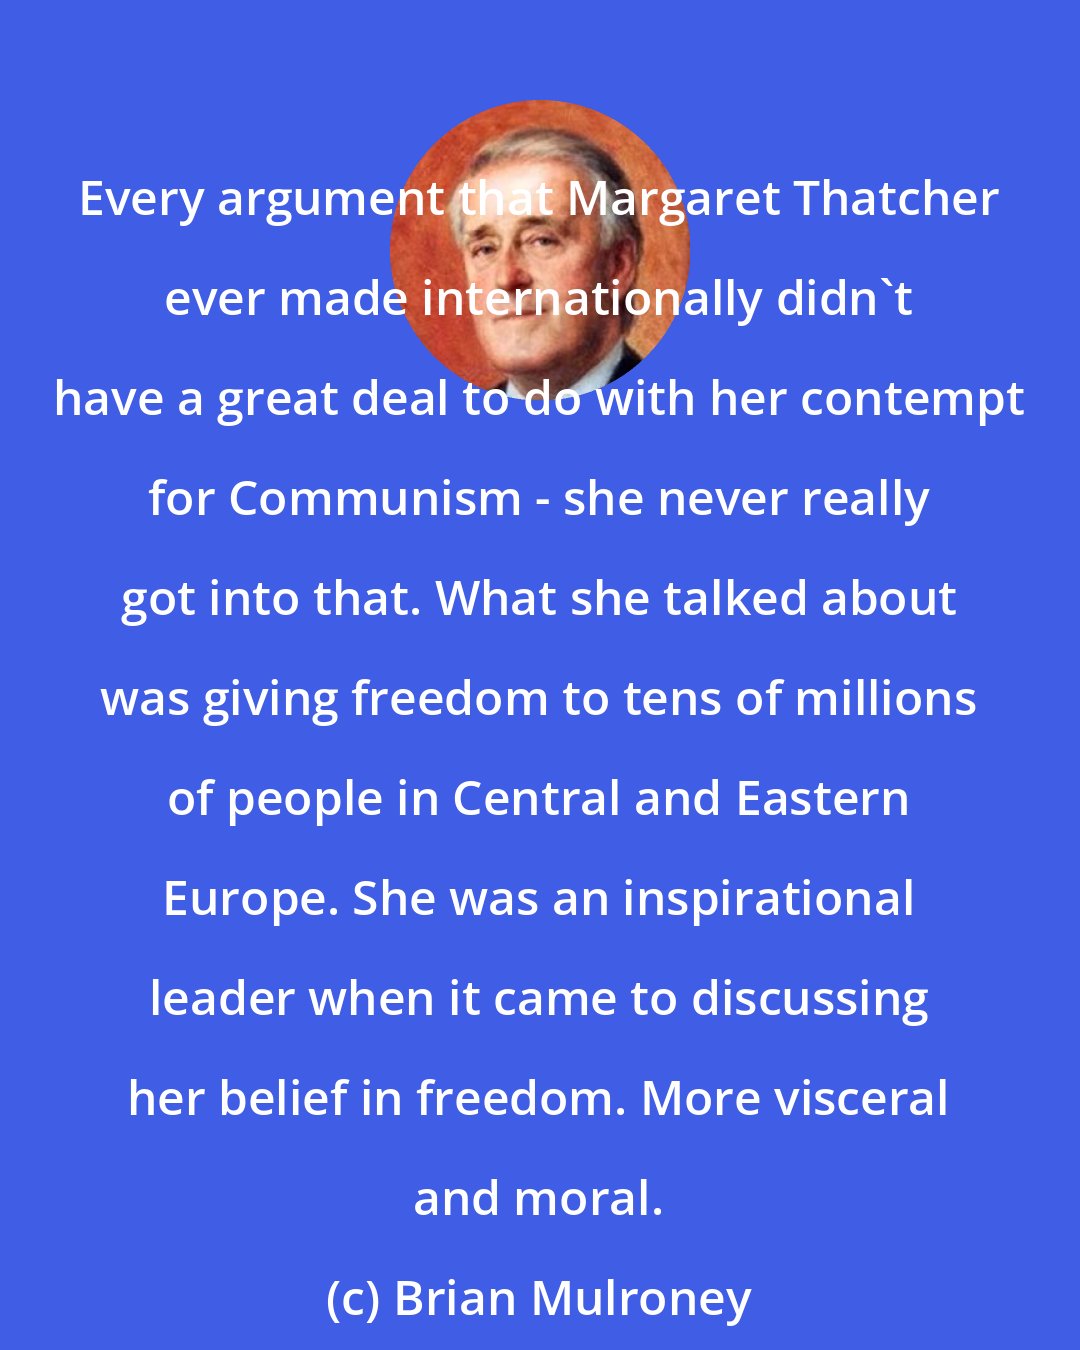 Brian Mulroney: Every argument that Margaret Thatcher ever made internationally didn't have a great deal to do with her contempt for Communism - she never really got into that. What she talked about was giving freedom to tens of millions of people in Central and Eastern Europe. She was an inspirational leader when it came to discussing her belief in freedom. More visceral and moral.